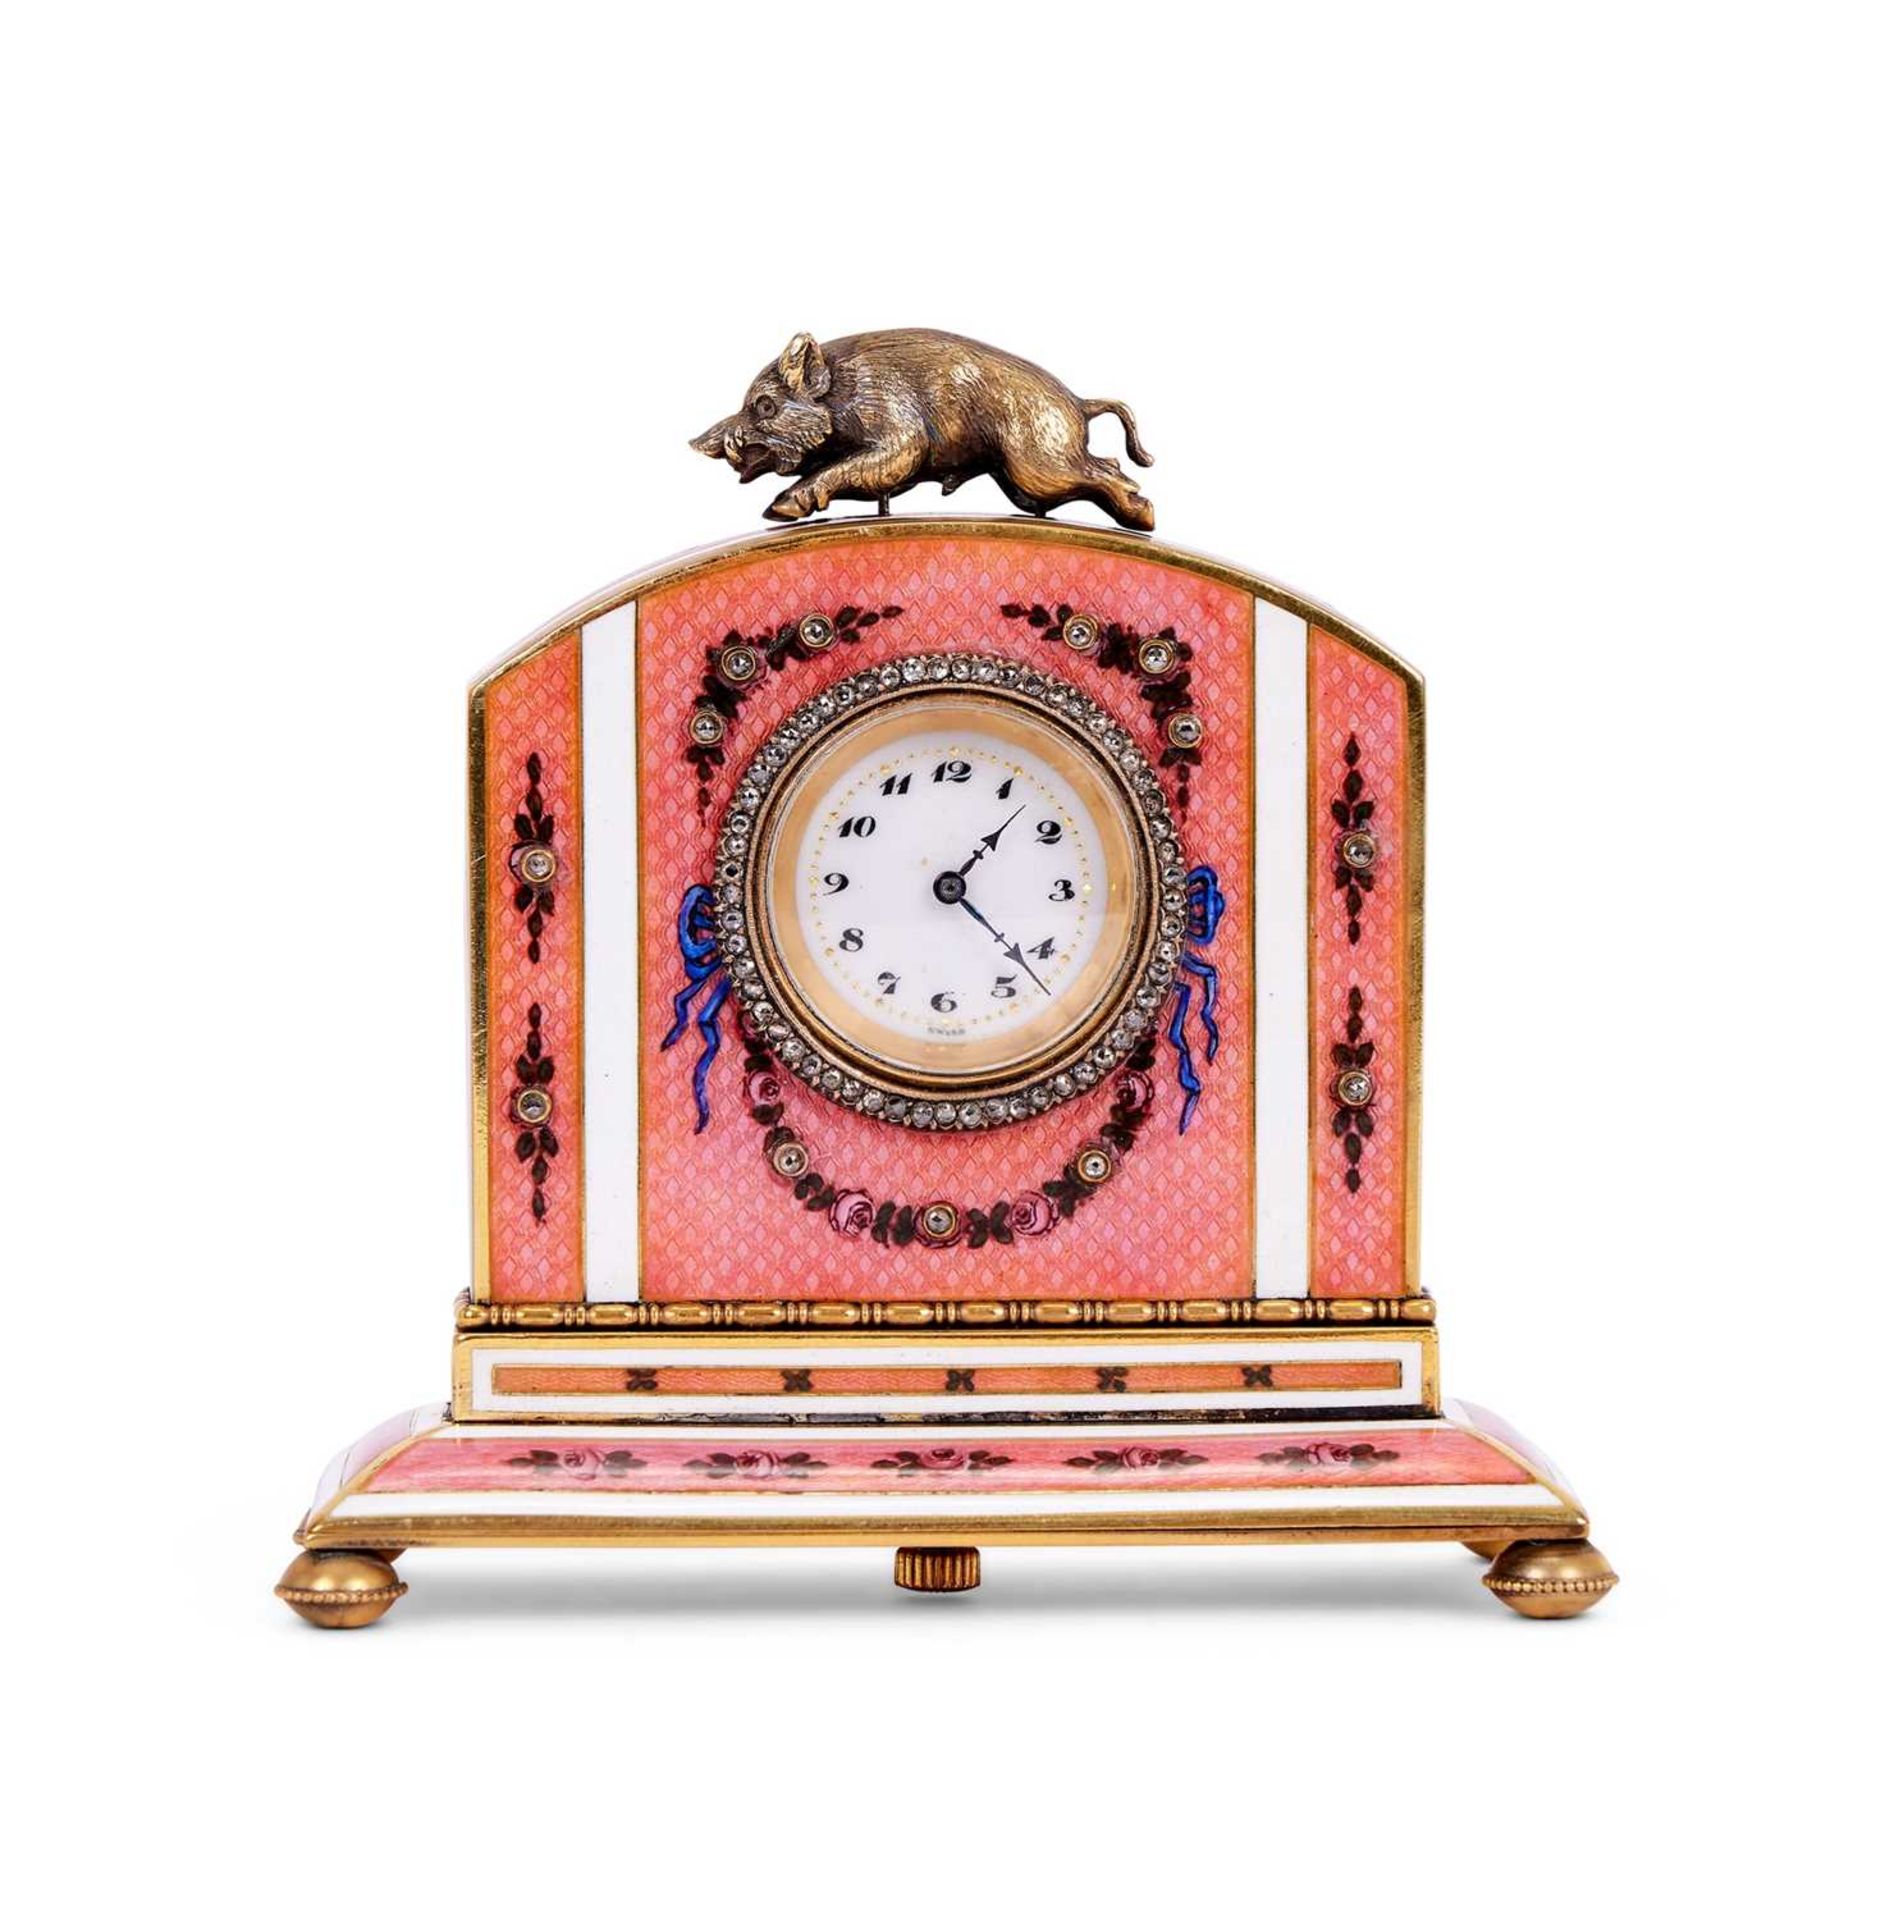 A FABERGE STYLE DIAMOND SET, GUILLOCHE ENAMEL AND SILVER GILT TRAVELLING CLOCK